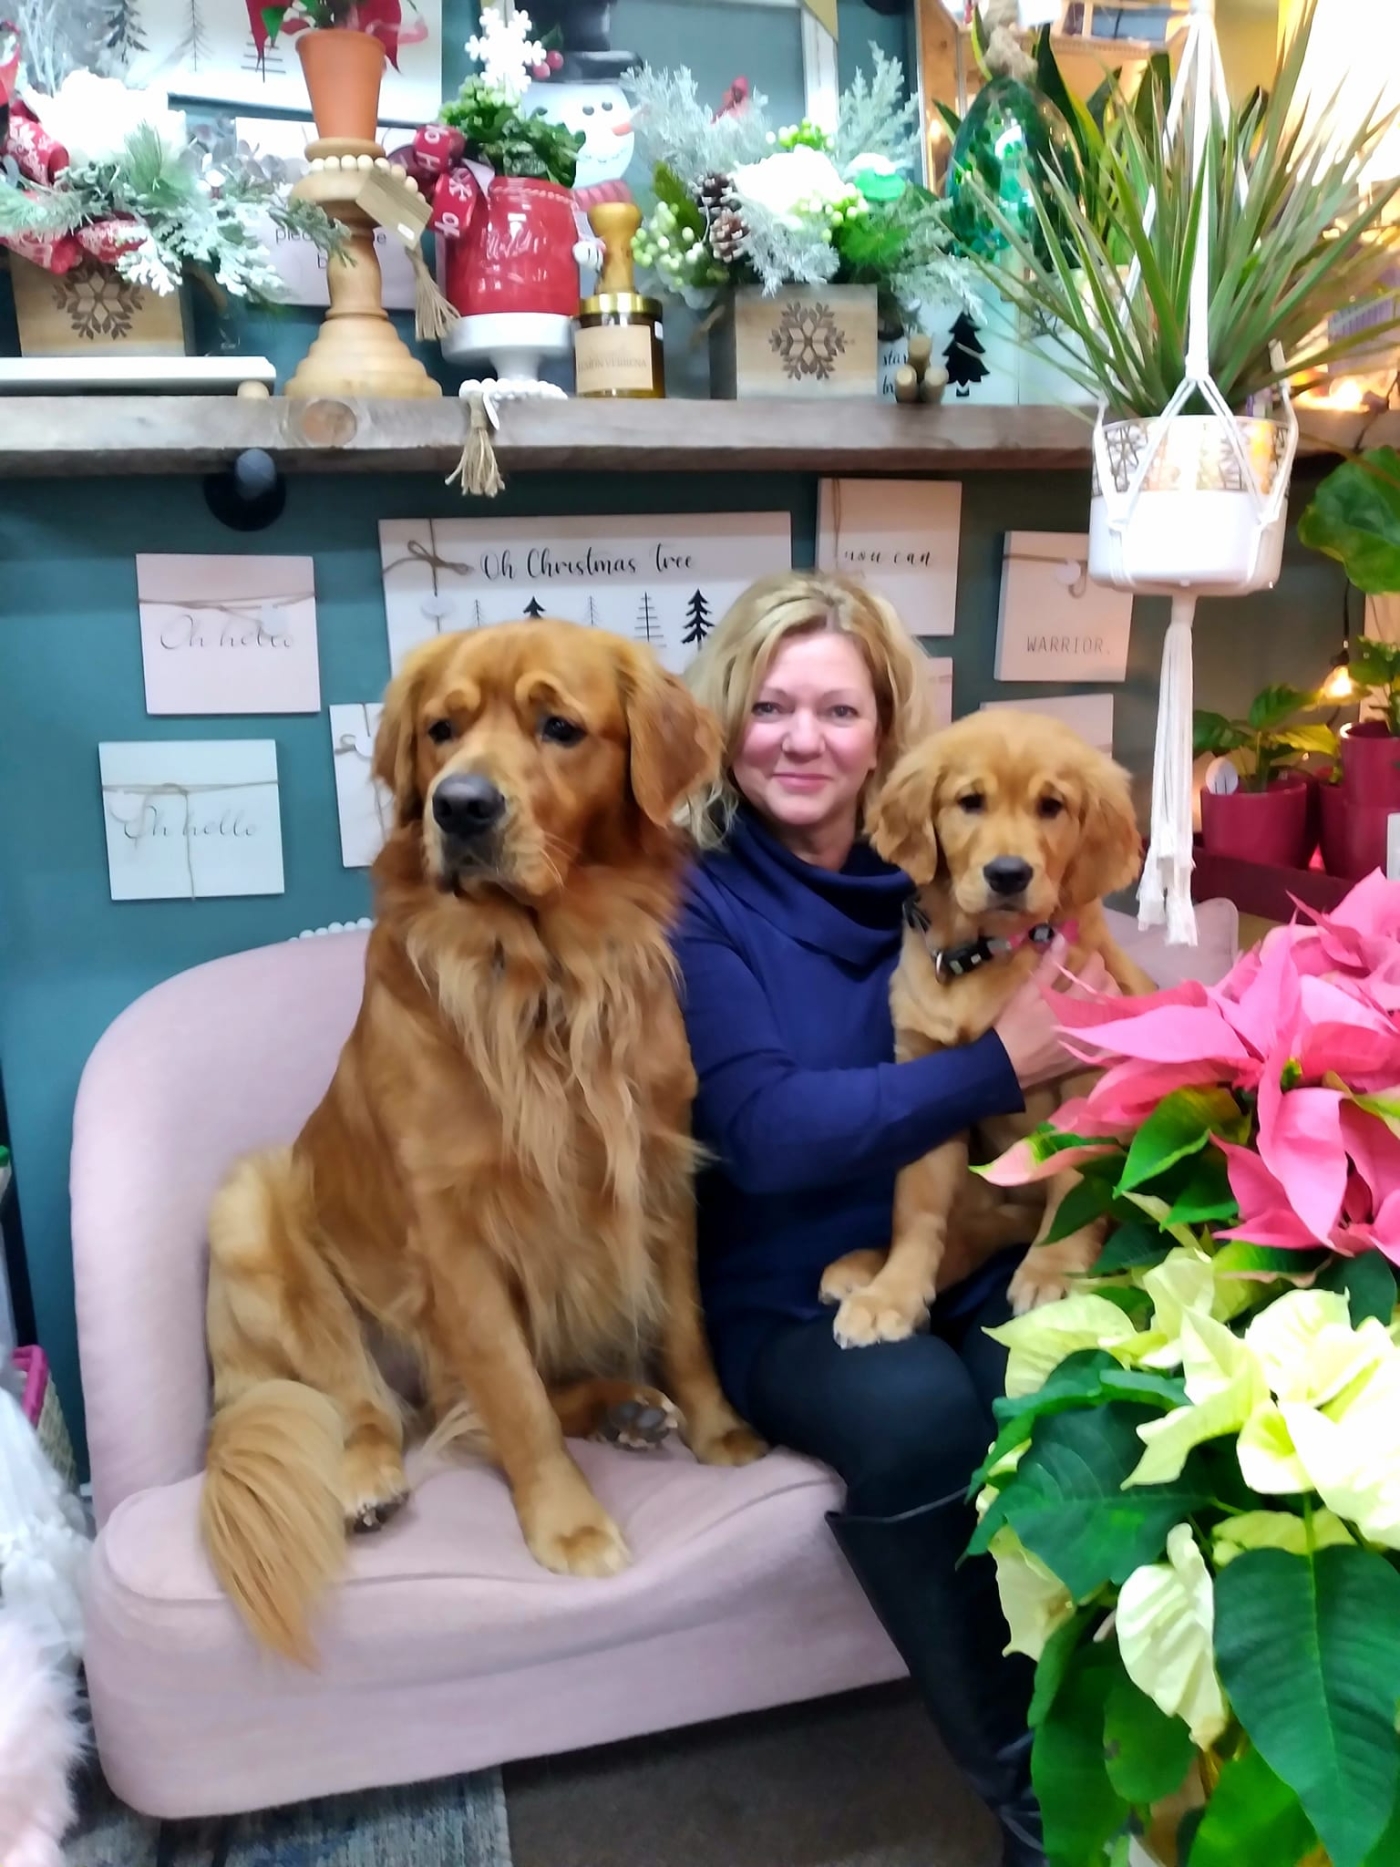 Sharon and her dogs, John Denver & Norma Jean, sit together in the flower shop